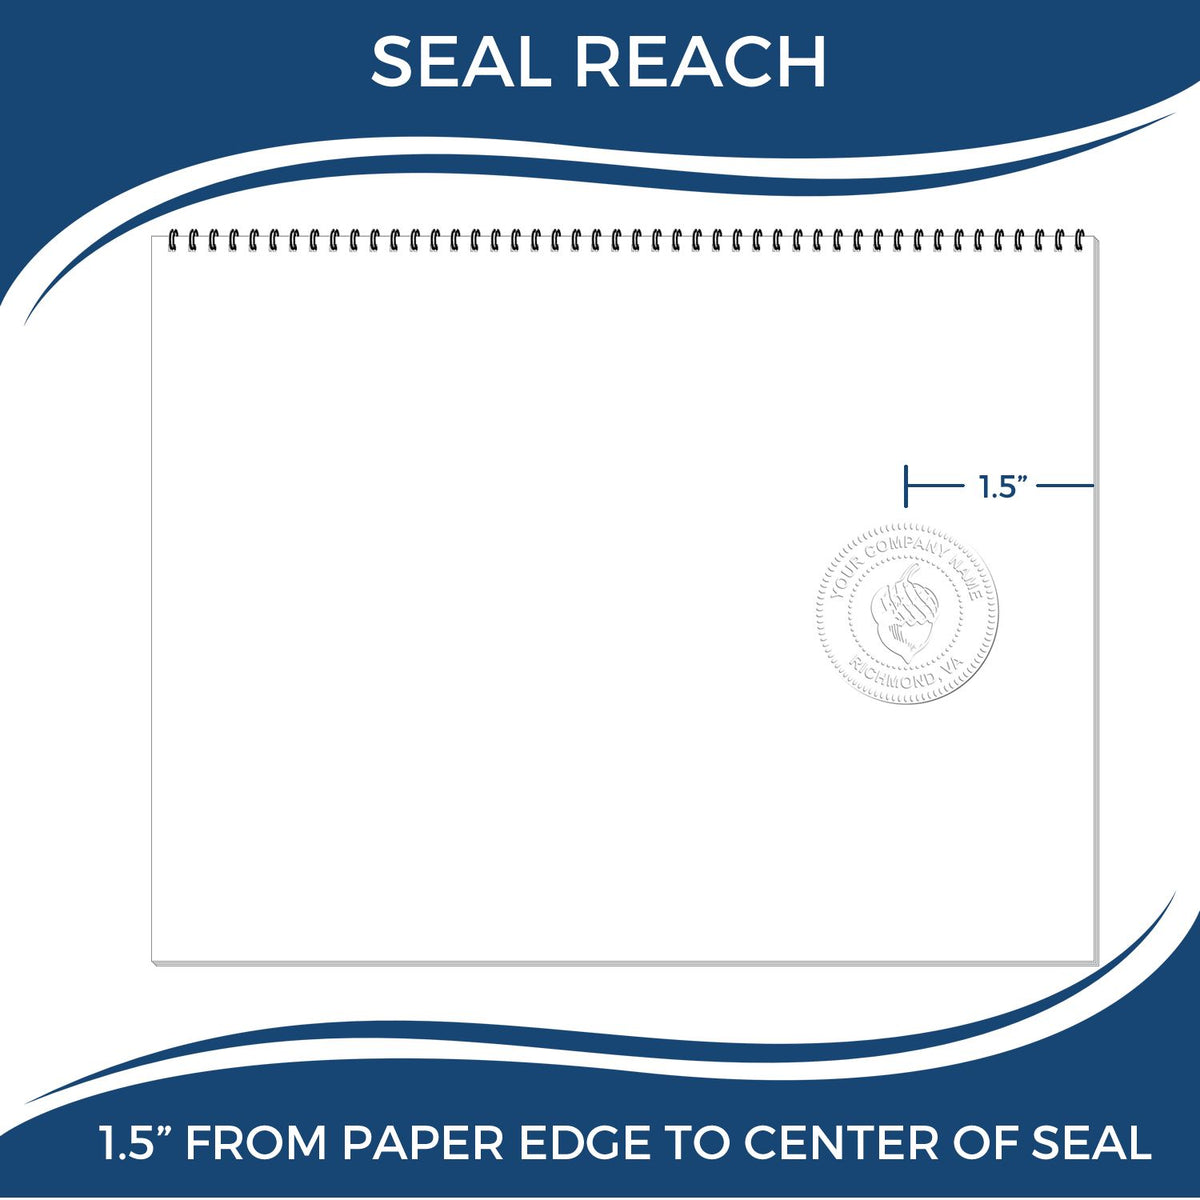 An infographic showing the seal reach which is represented by a ruler and a miniature seal image of the Hybrid South Dakota Architect Seal